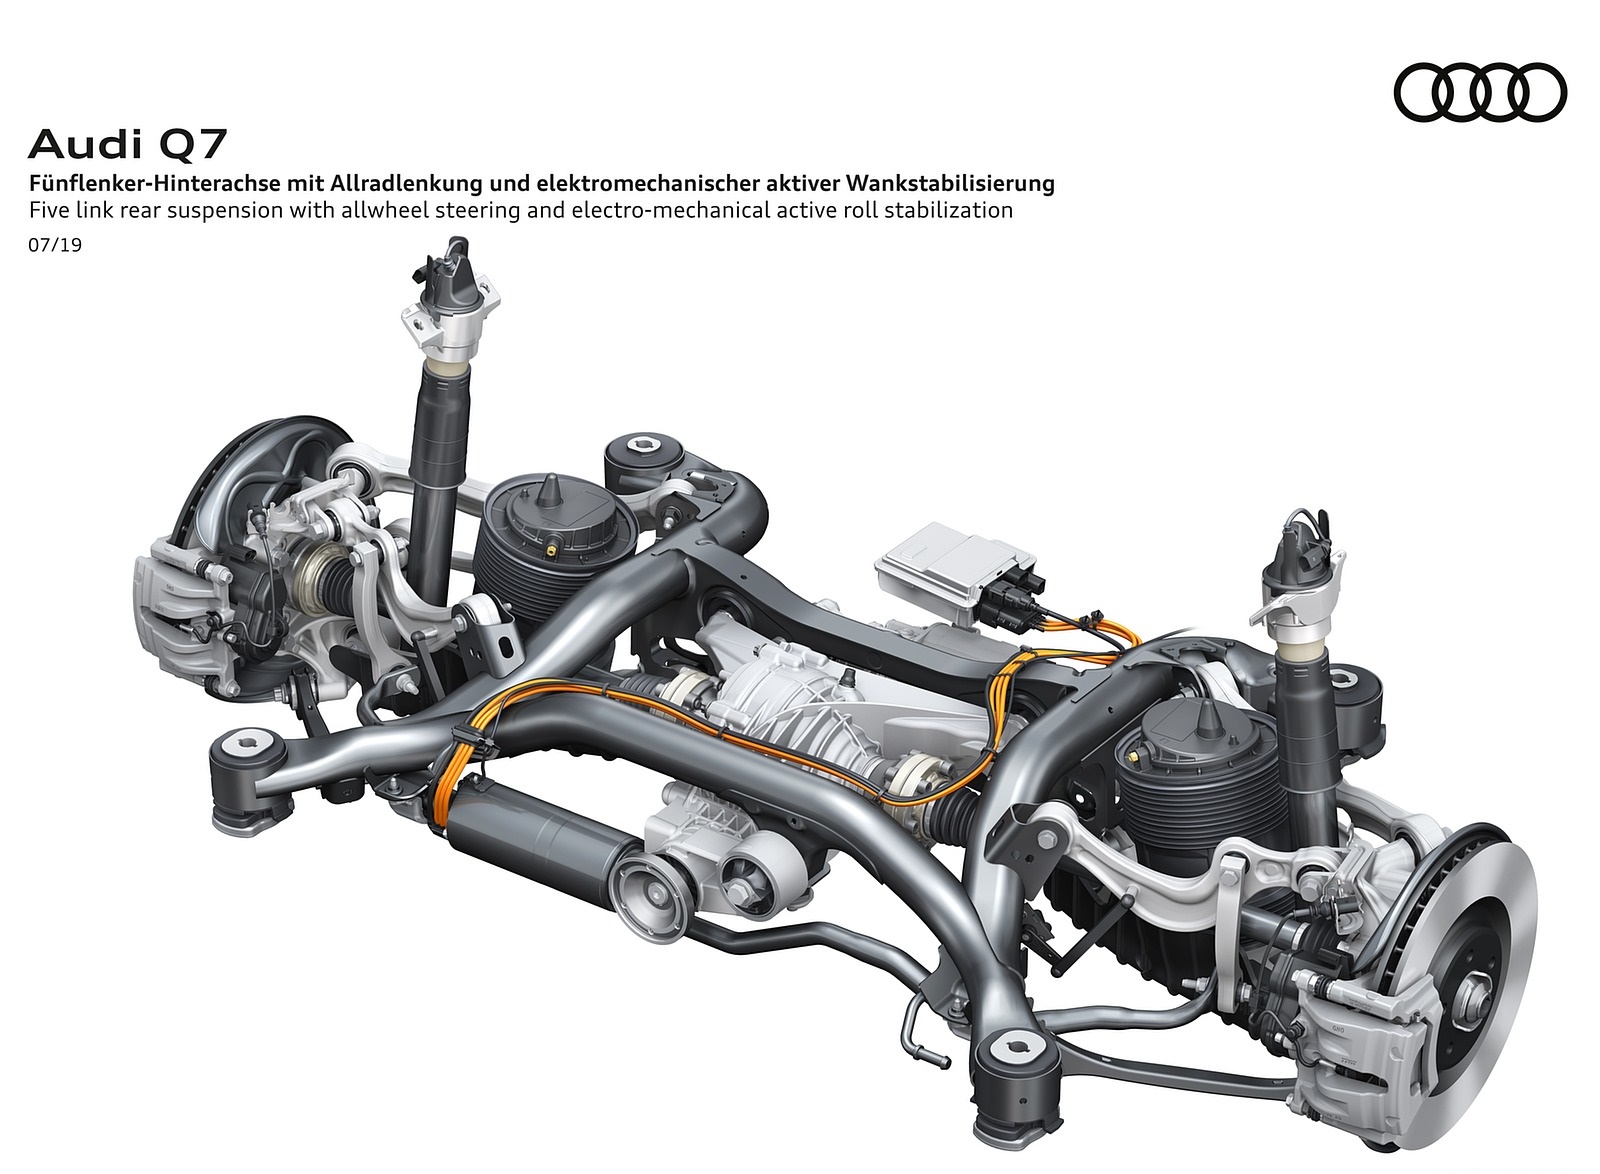 2020 Audi Q7 Five link rear suspension with allwheel steering and electro-mechanical active roll stabilization Wallpapers #134 of 158